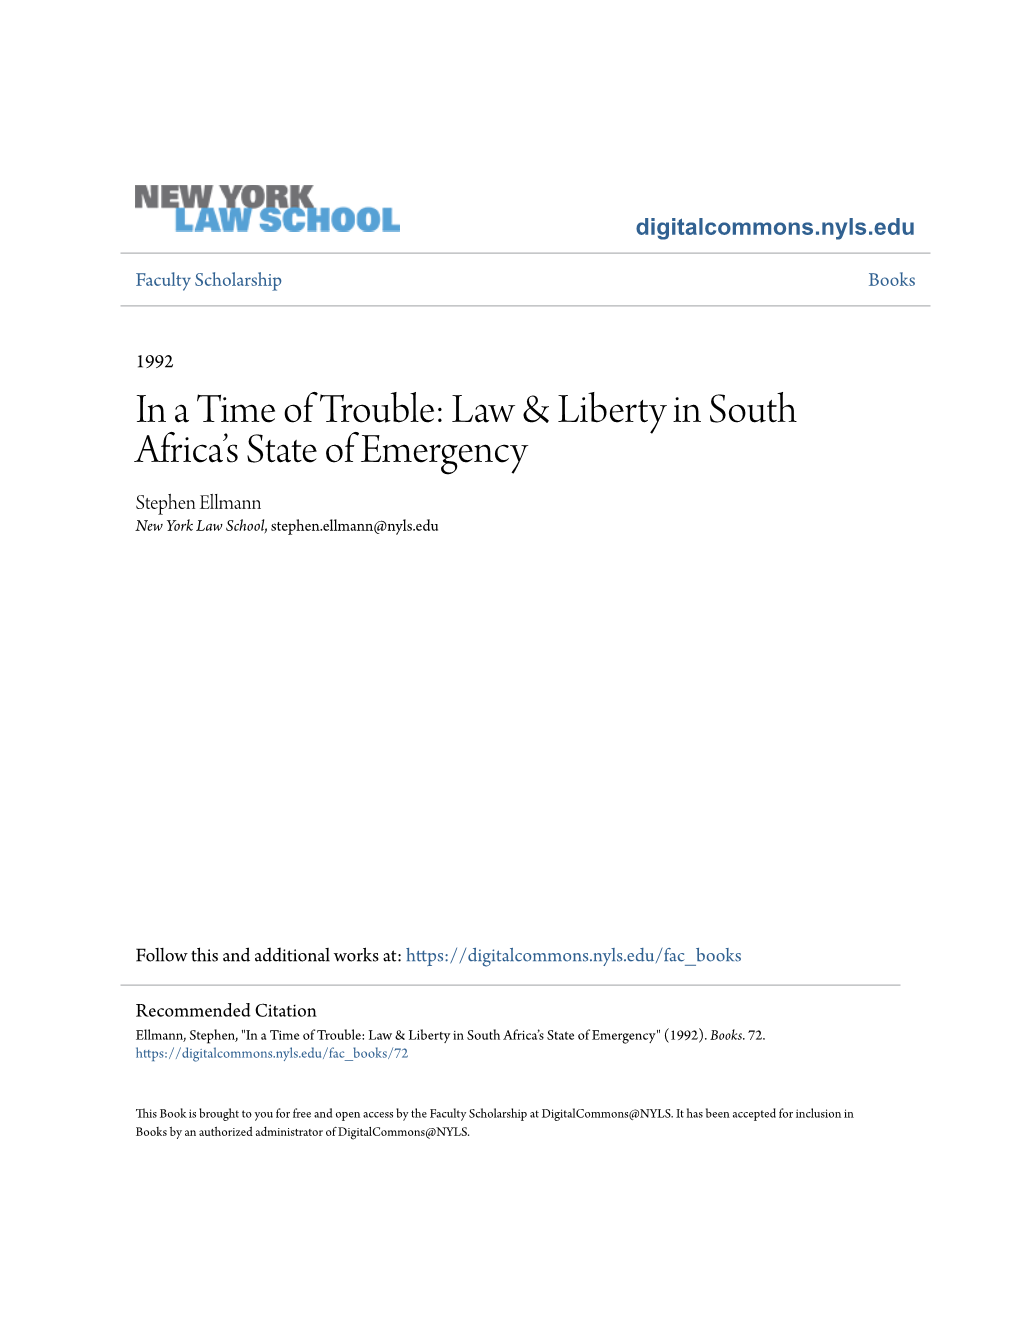 In a Time of Trouble: Law & Liberty in South Africa’S State of Emergency Stephen Ellmann New York Law School, Stephen.Ellmann@Nyls.Edu